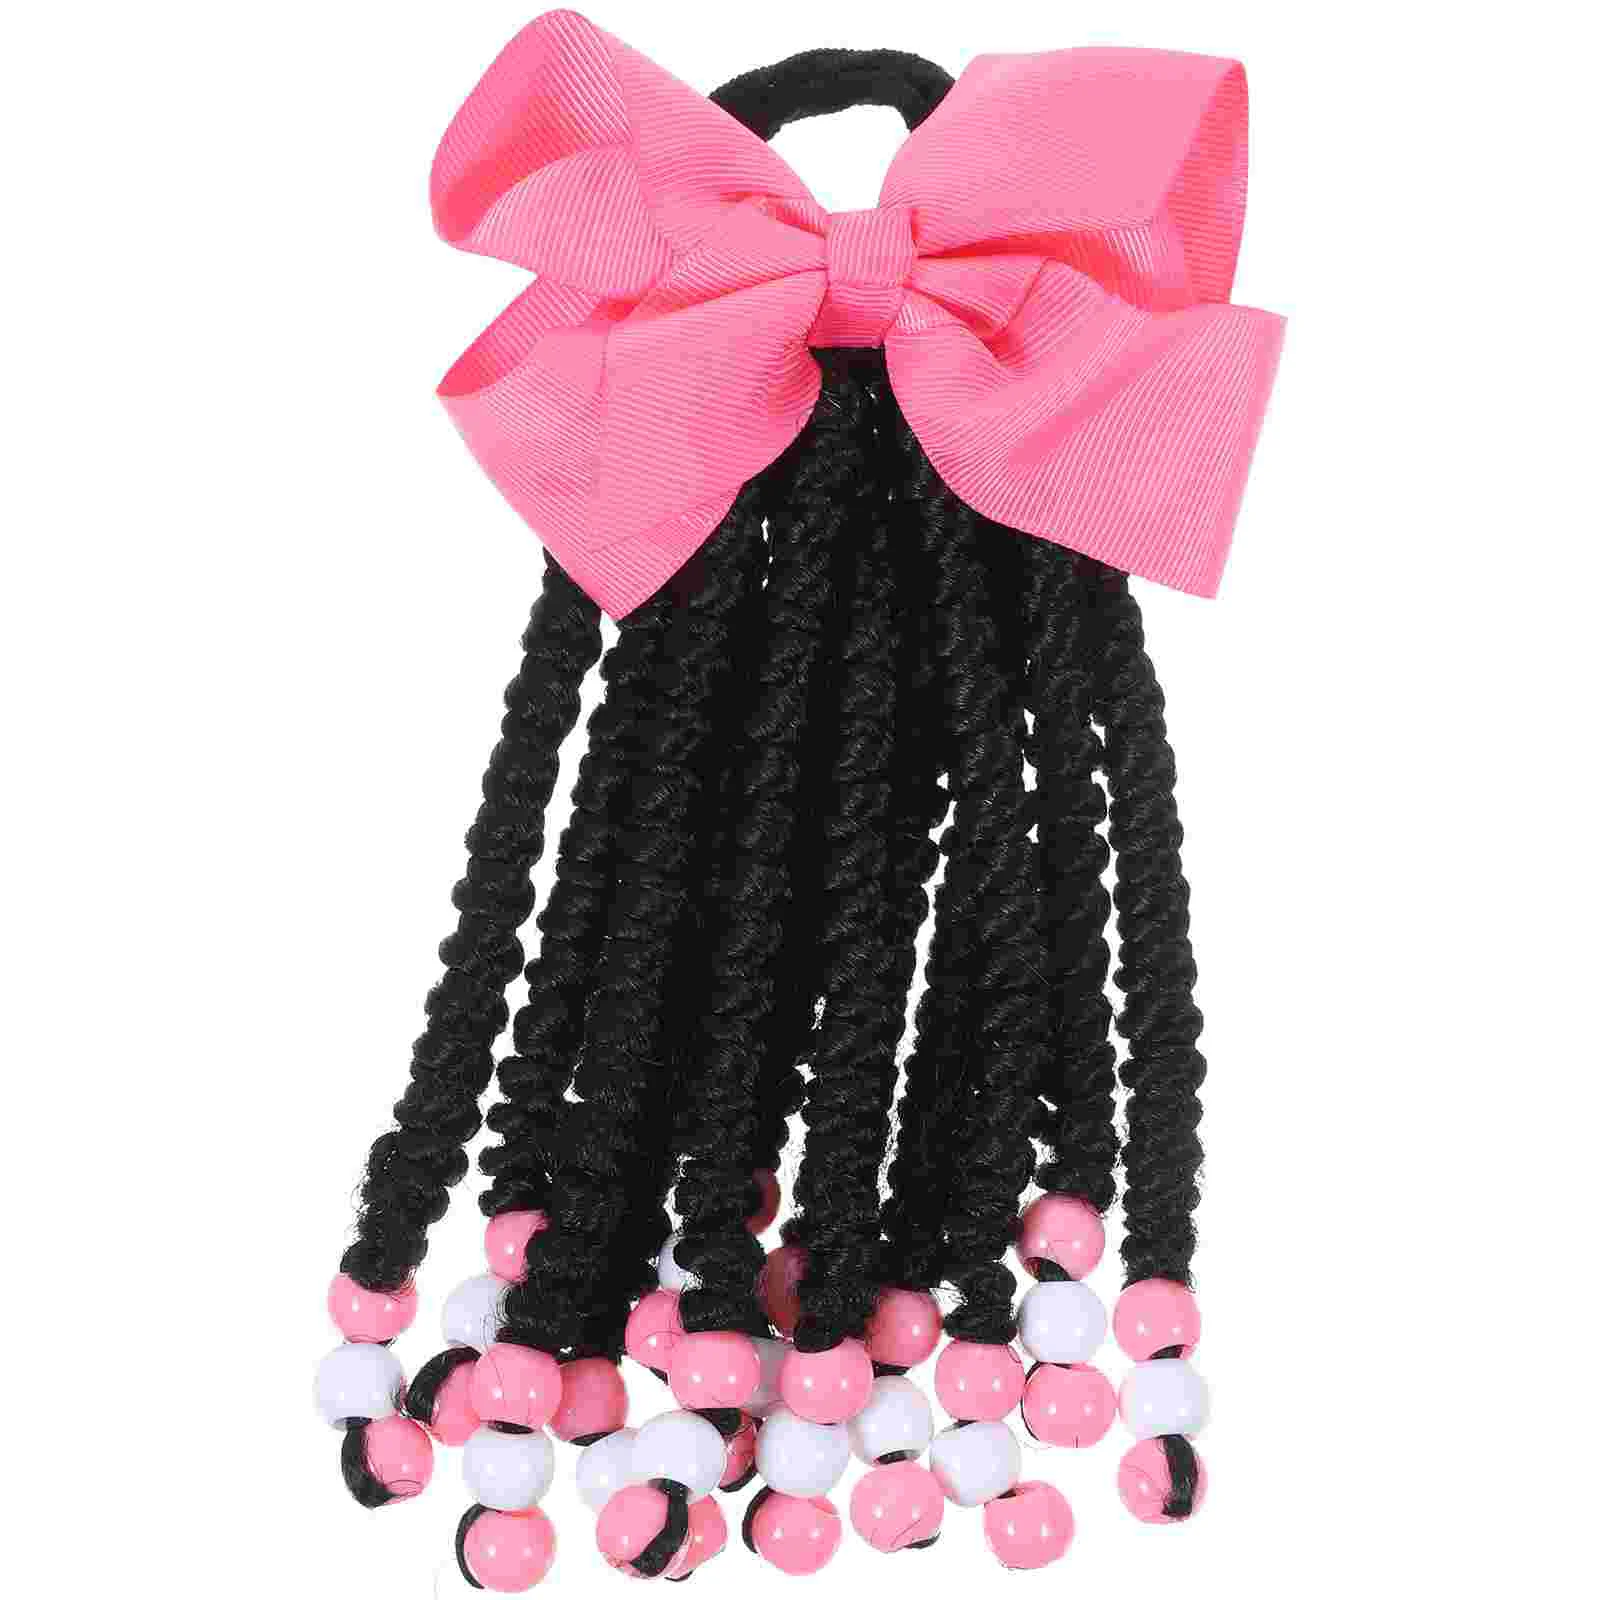 

Wigs Hair Extensions Braids Weave Beaded Braided Ponytail Bowknot Chemical Fiber Women's Synthetic